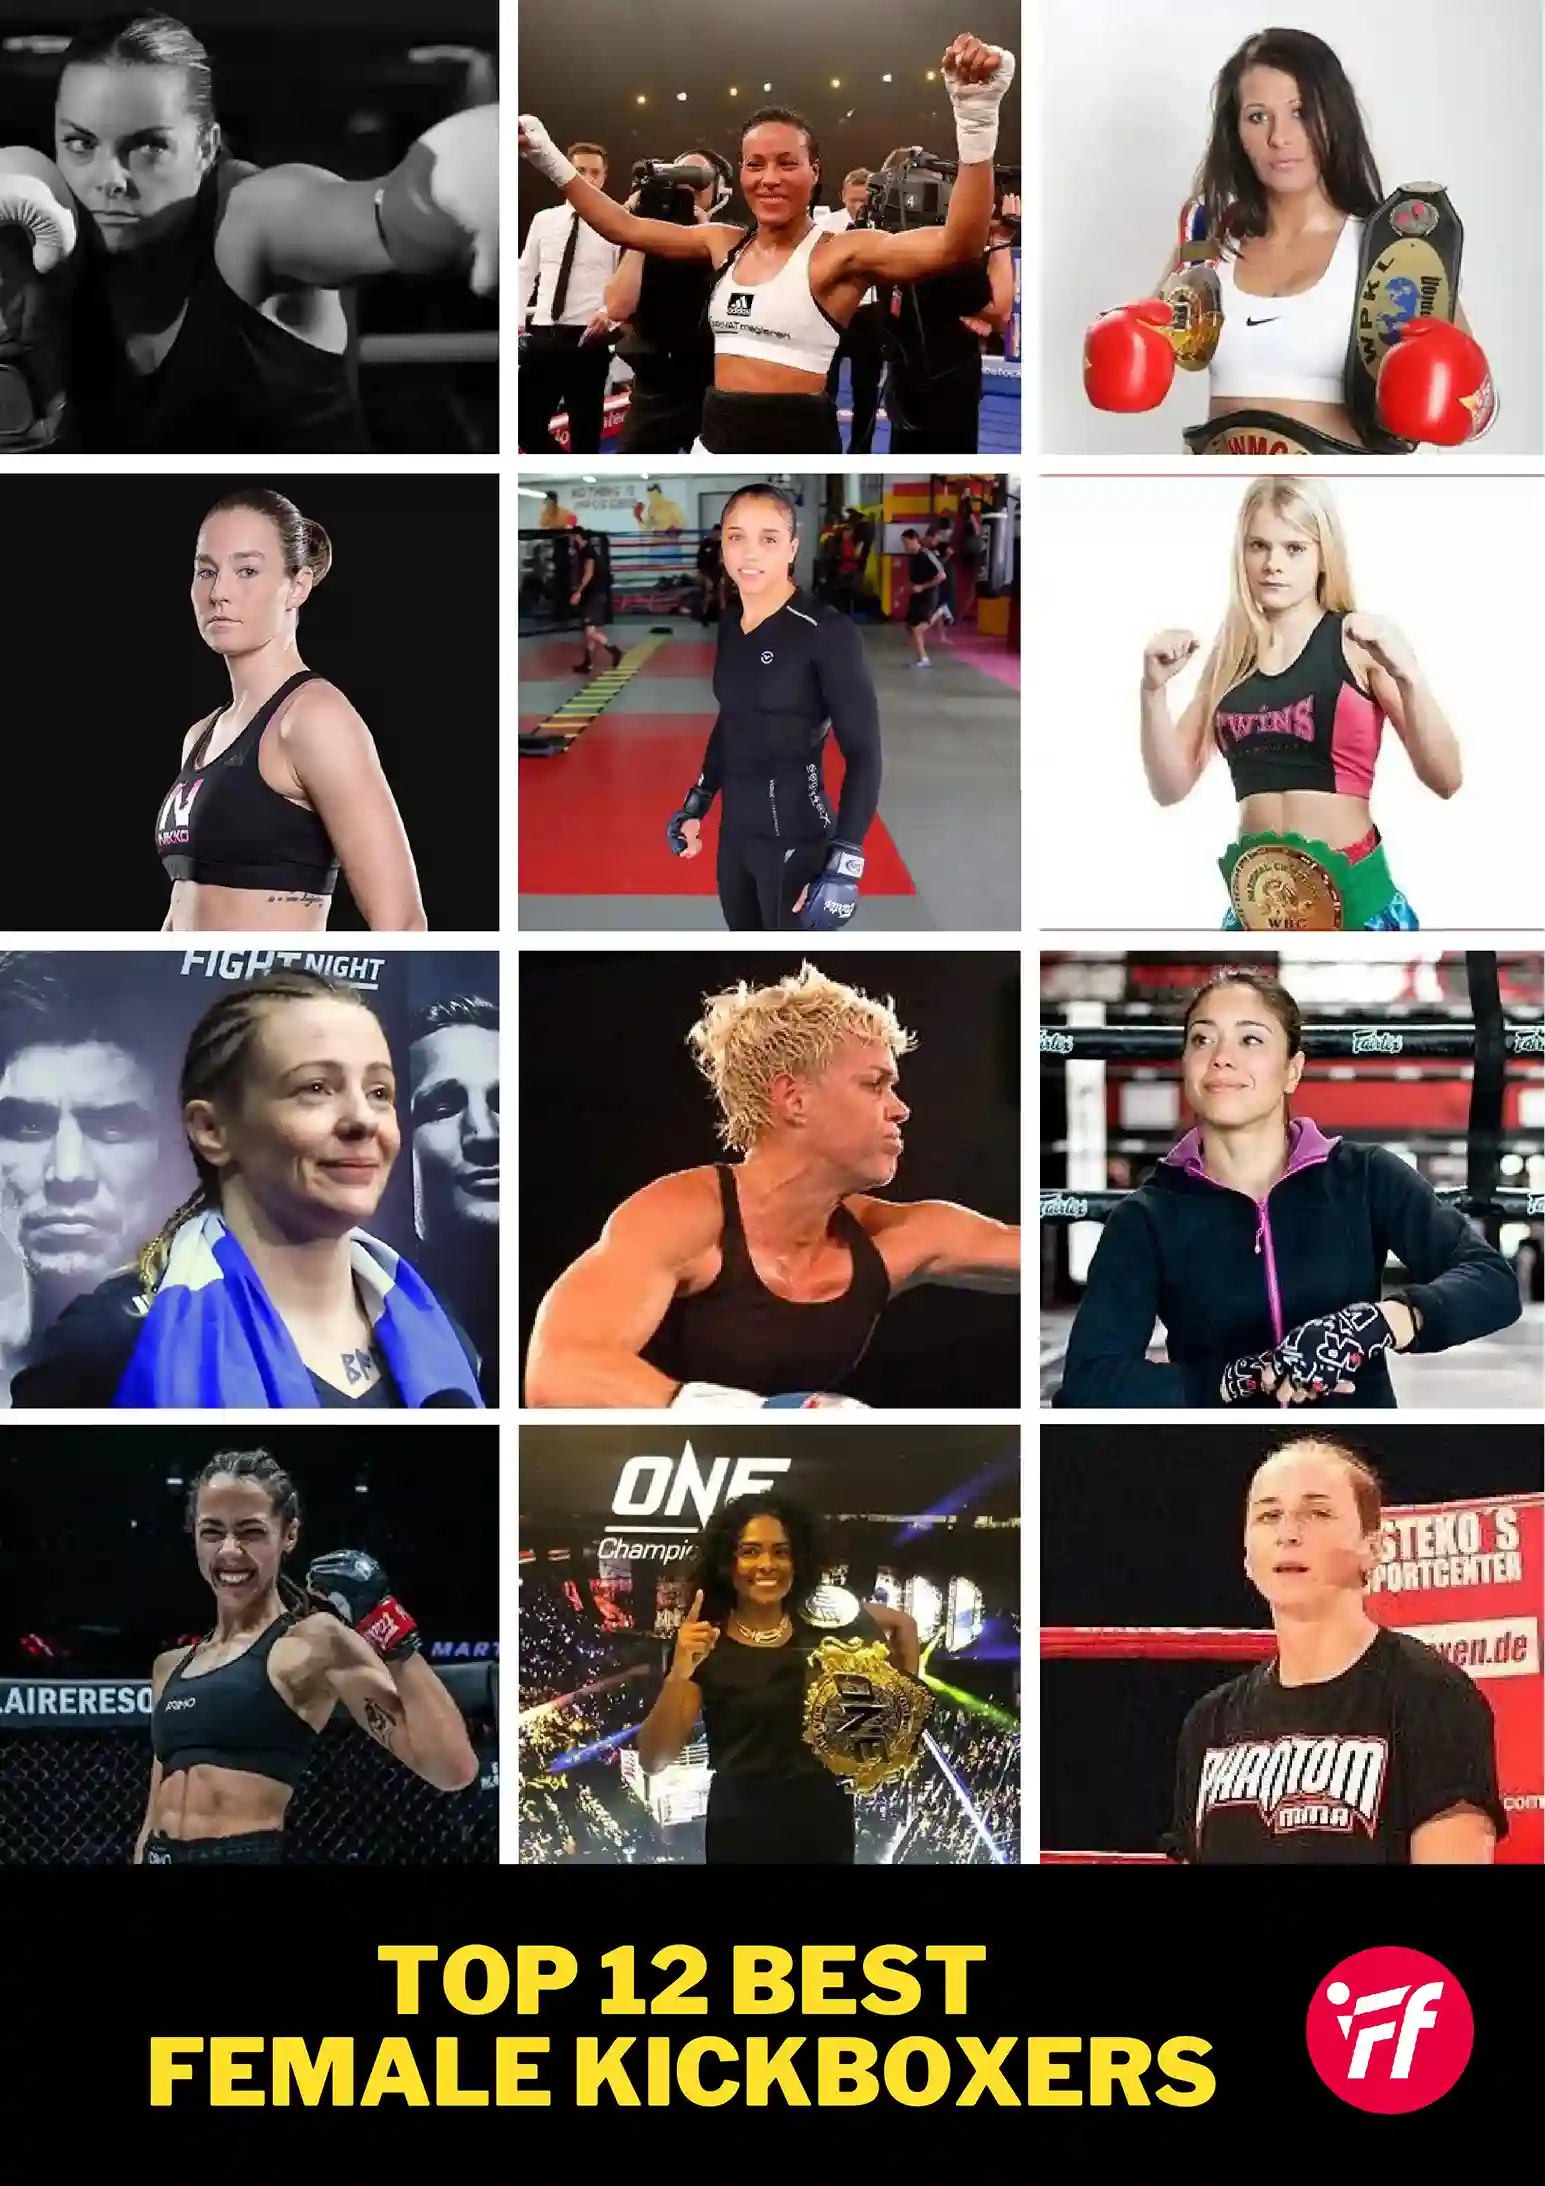 In this image we discuss the 12 best female kickboxers of all time in the world for details we discuss in the article